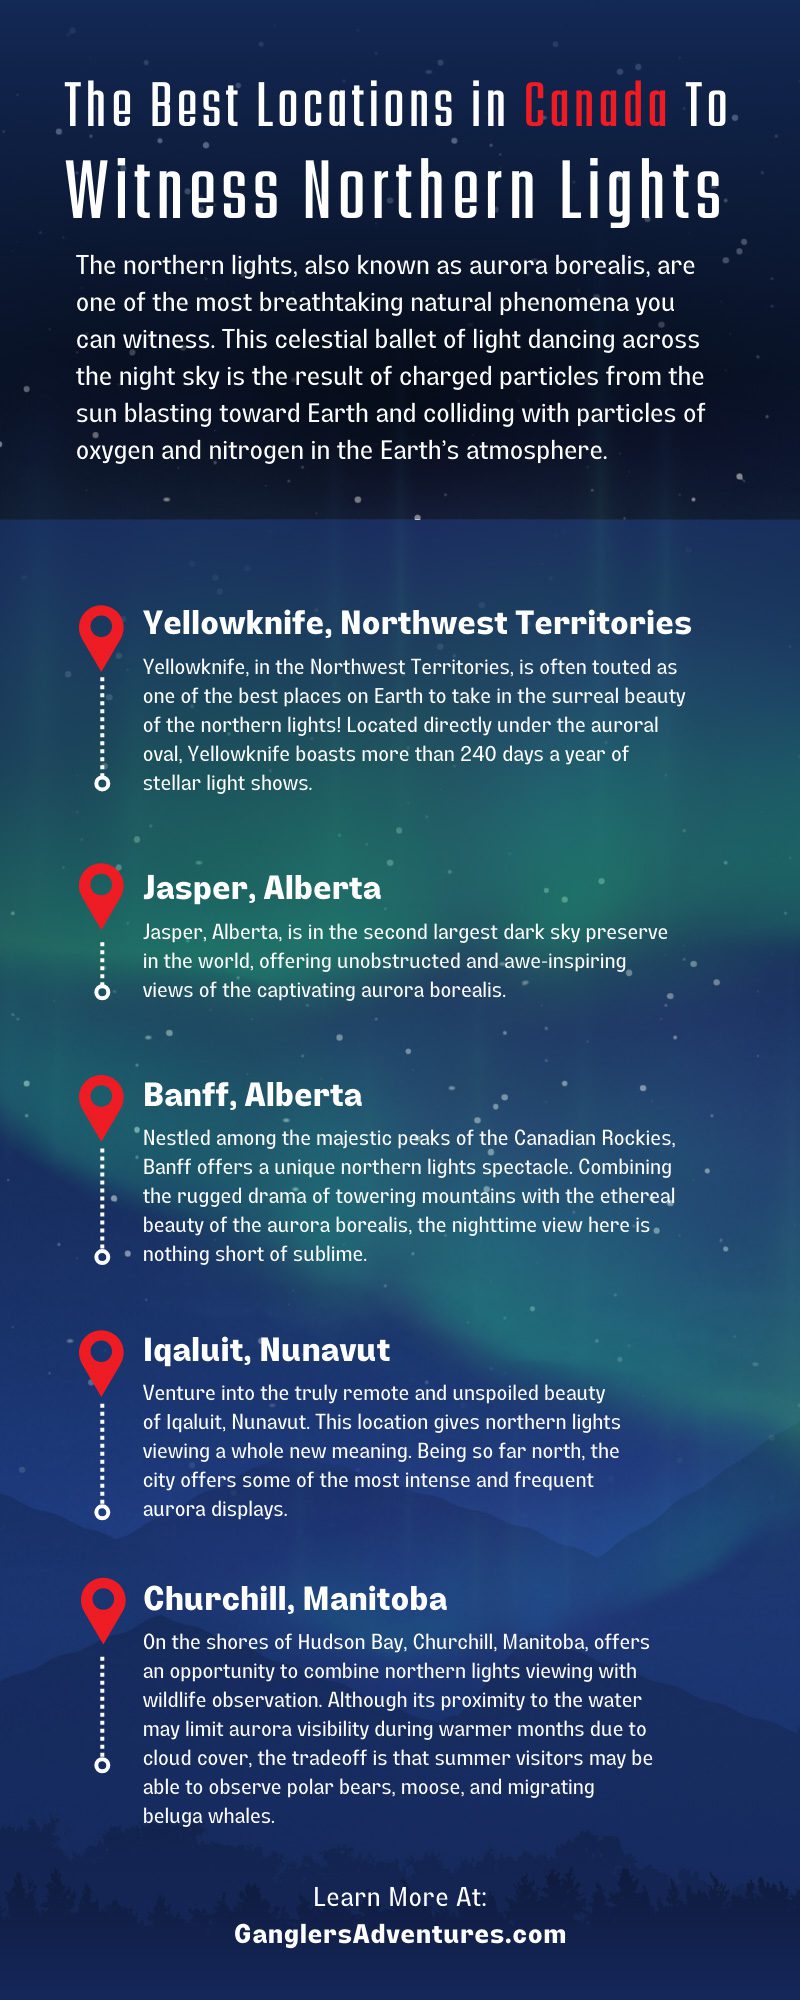 The Best Locations in Canada To View Northern Lights